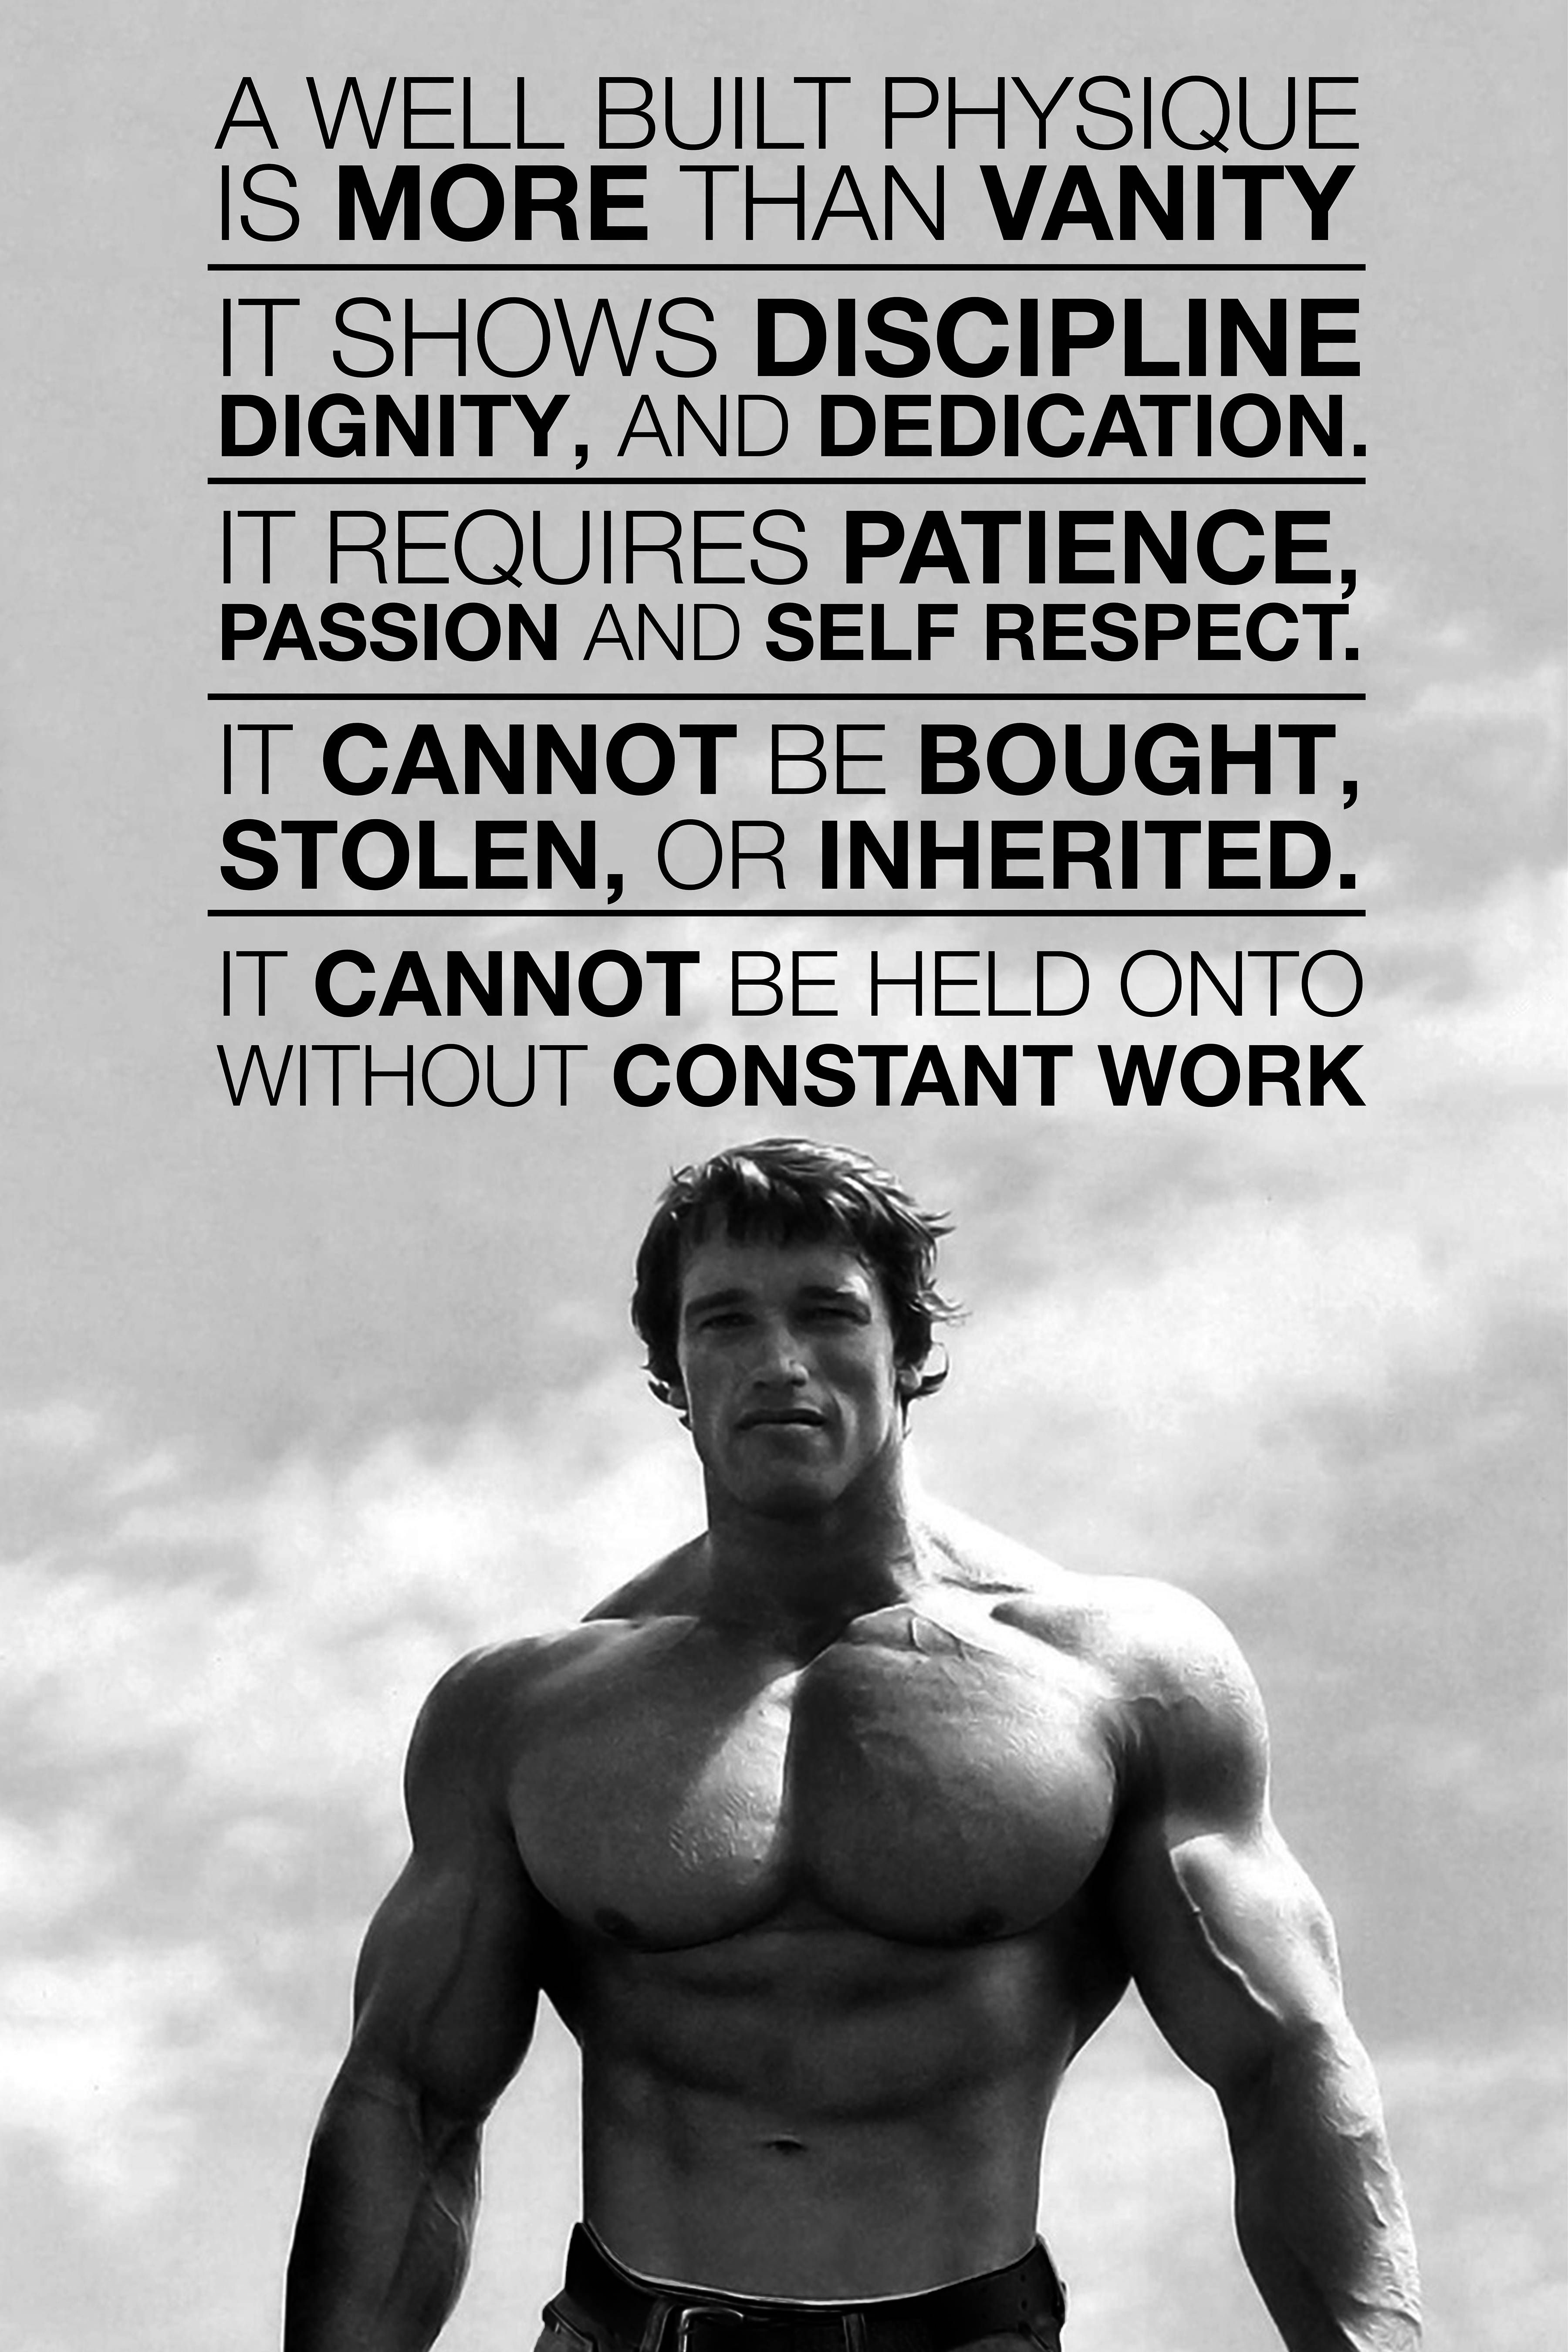 Image Inspirational Arnold Poster. Bodybuilding motivation quotes, Bodybuilding quotes, Arnold schwarzenegger quotes